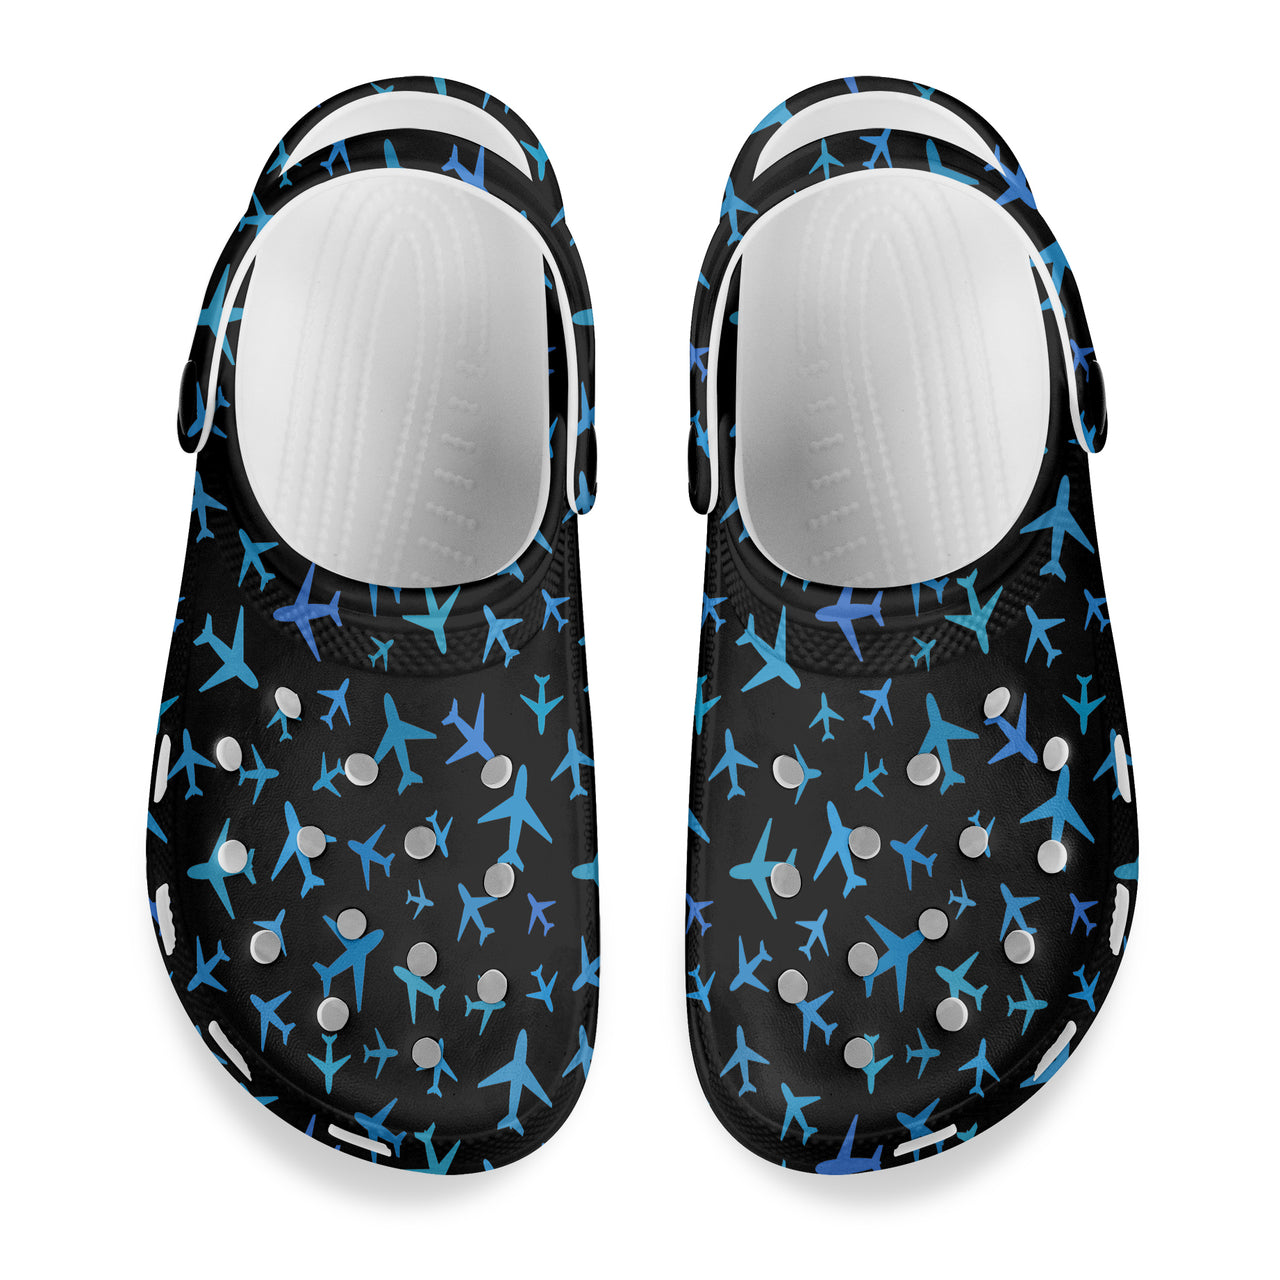 Many Airplanes Black Designed Hole Shoes & Slippers (MEN)